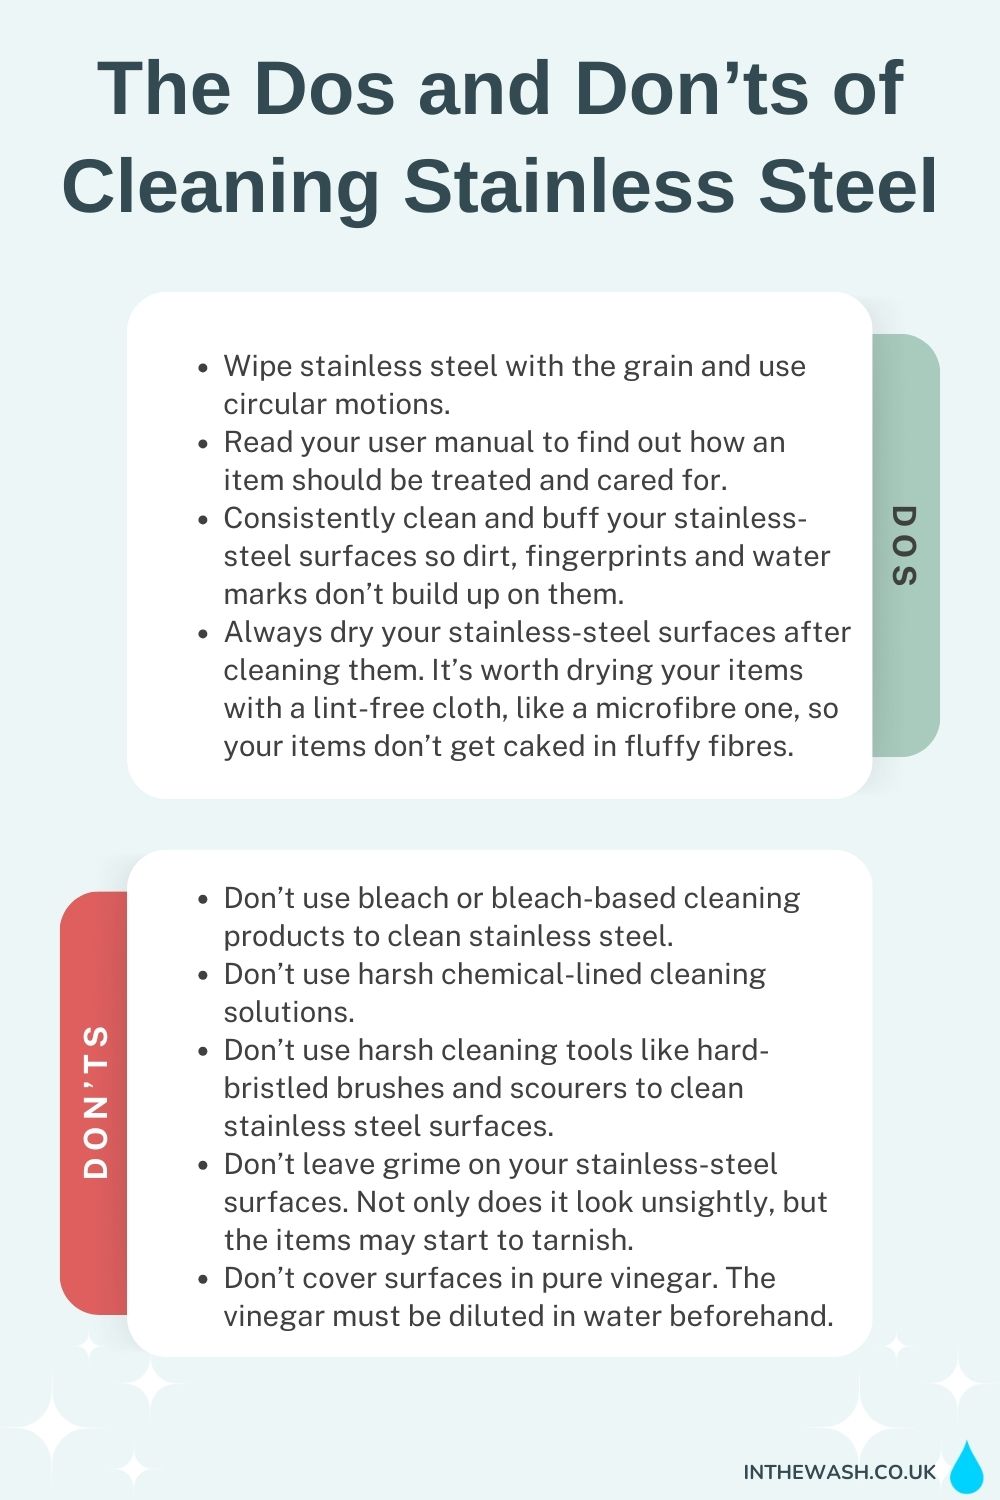 The dos and don'ts of cleaning stainless steel